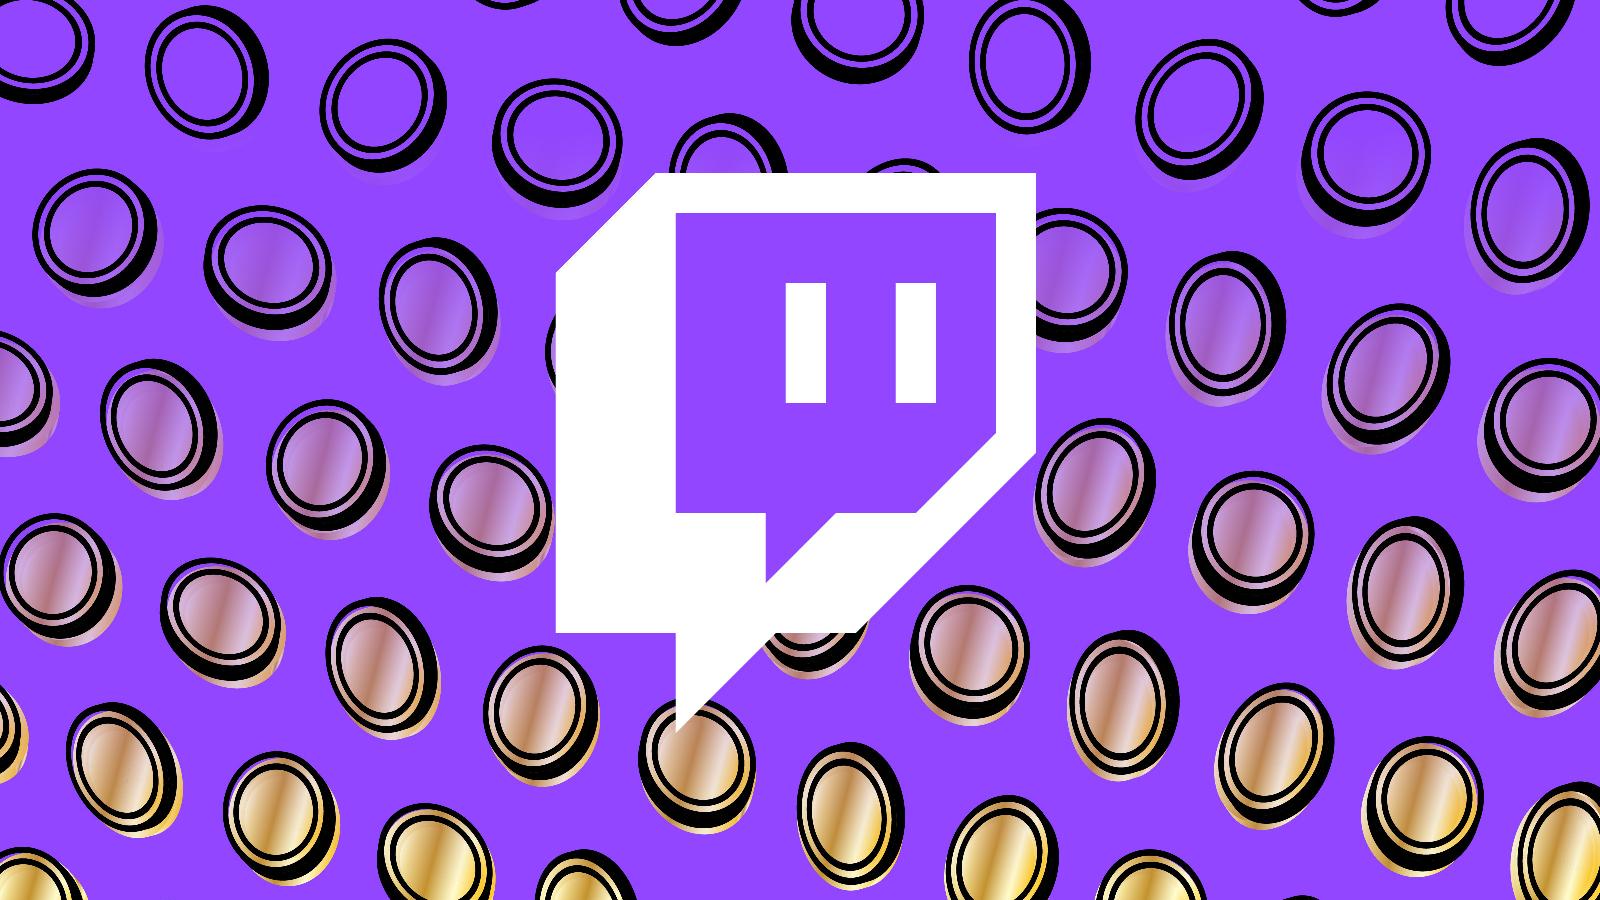 Twitch to shut down in Korea over ‘prohibitively expensive’ network fees